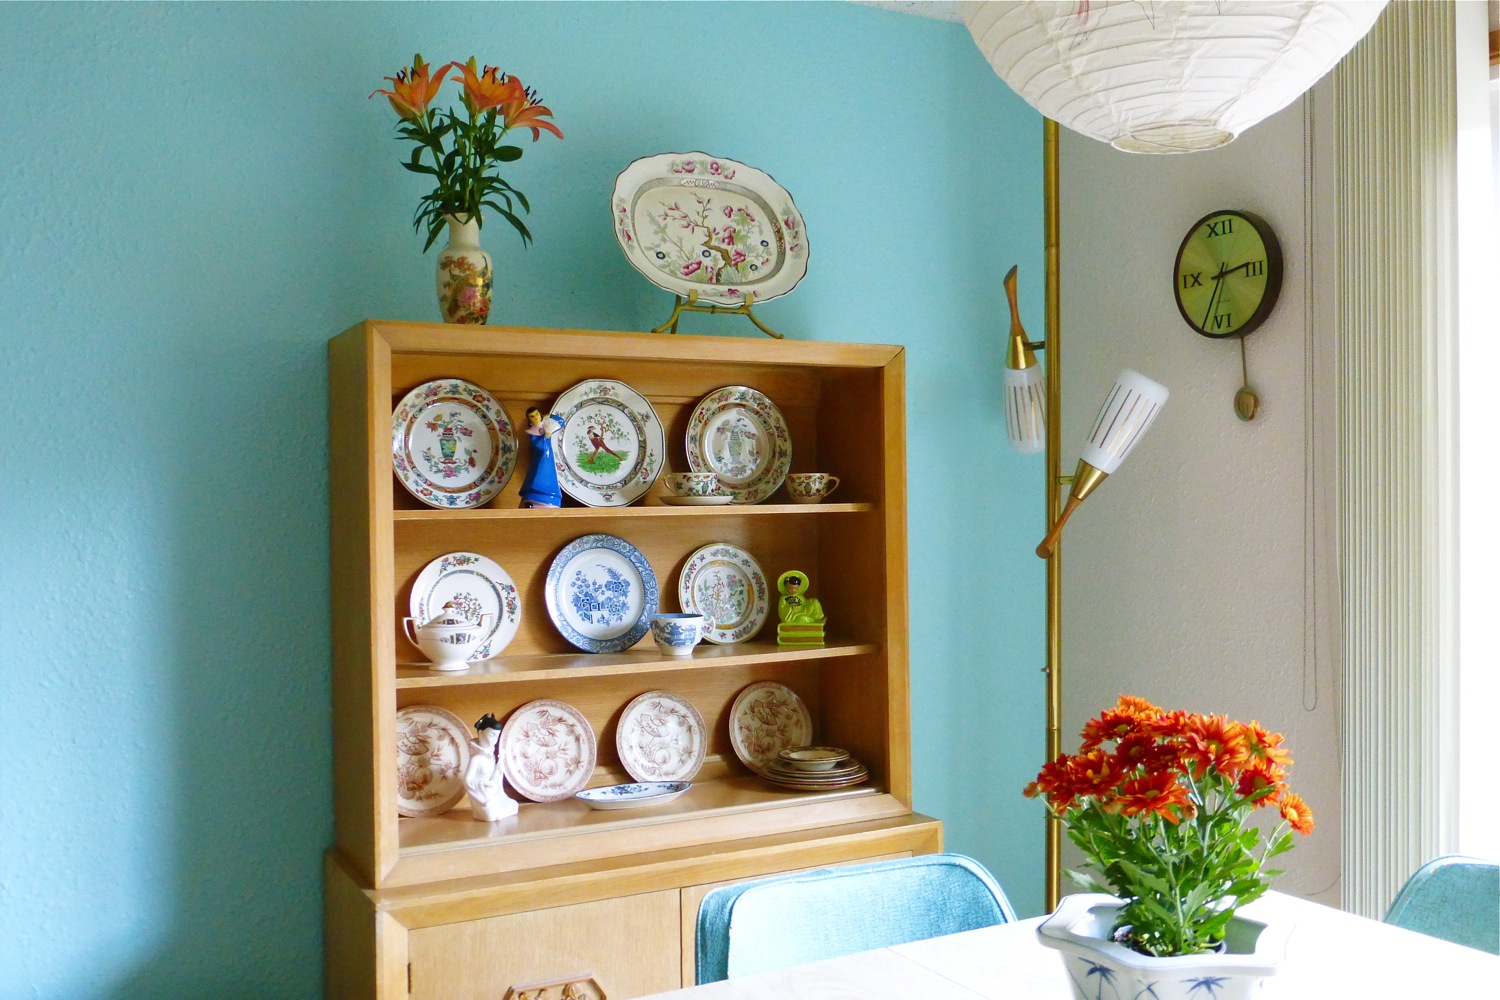 Styling a James Mont Midcentury Chinoiserie Limed Oak Hutch with Antique Chinoiserie Revival Dish ware, Midcentury styling, antique chinoiserie dish ware, chinoiserie styling, 1880 Brownfield & Son, 1900 Royal Doulton Pekin, 1917 Wood & Sons Woods Ware Wincanton plate, 1917 Wood & Sons Woods Ware Canton teacup, 1917 Wood & Sons Woods Ware Mayfair platter, Klein ©49 asian Chinoiserie figurine, 1913 Johnson Bros Pareekware plate, 1920 Cleveland China sugar bowl, 1905 Foley Art China Peacock Pottery Indian Tree plate, midcentury asian girl with fan bookend figurine, 1880 Alaska H & R plates, 1950 Ardalt Lenwile China asian girl playing musical instrument figurine, 1862 Burgess & Leigh Indian Tree platter